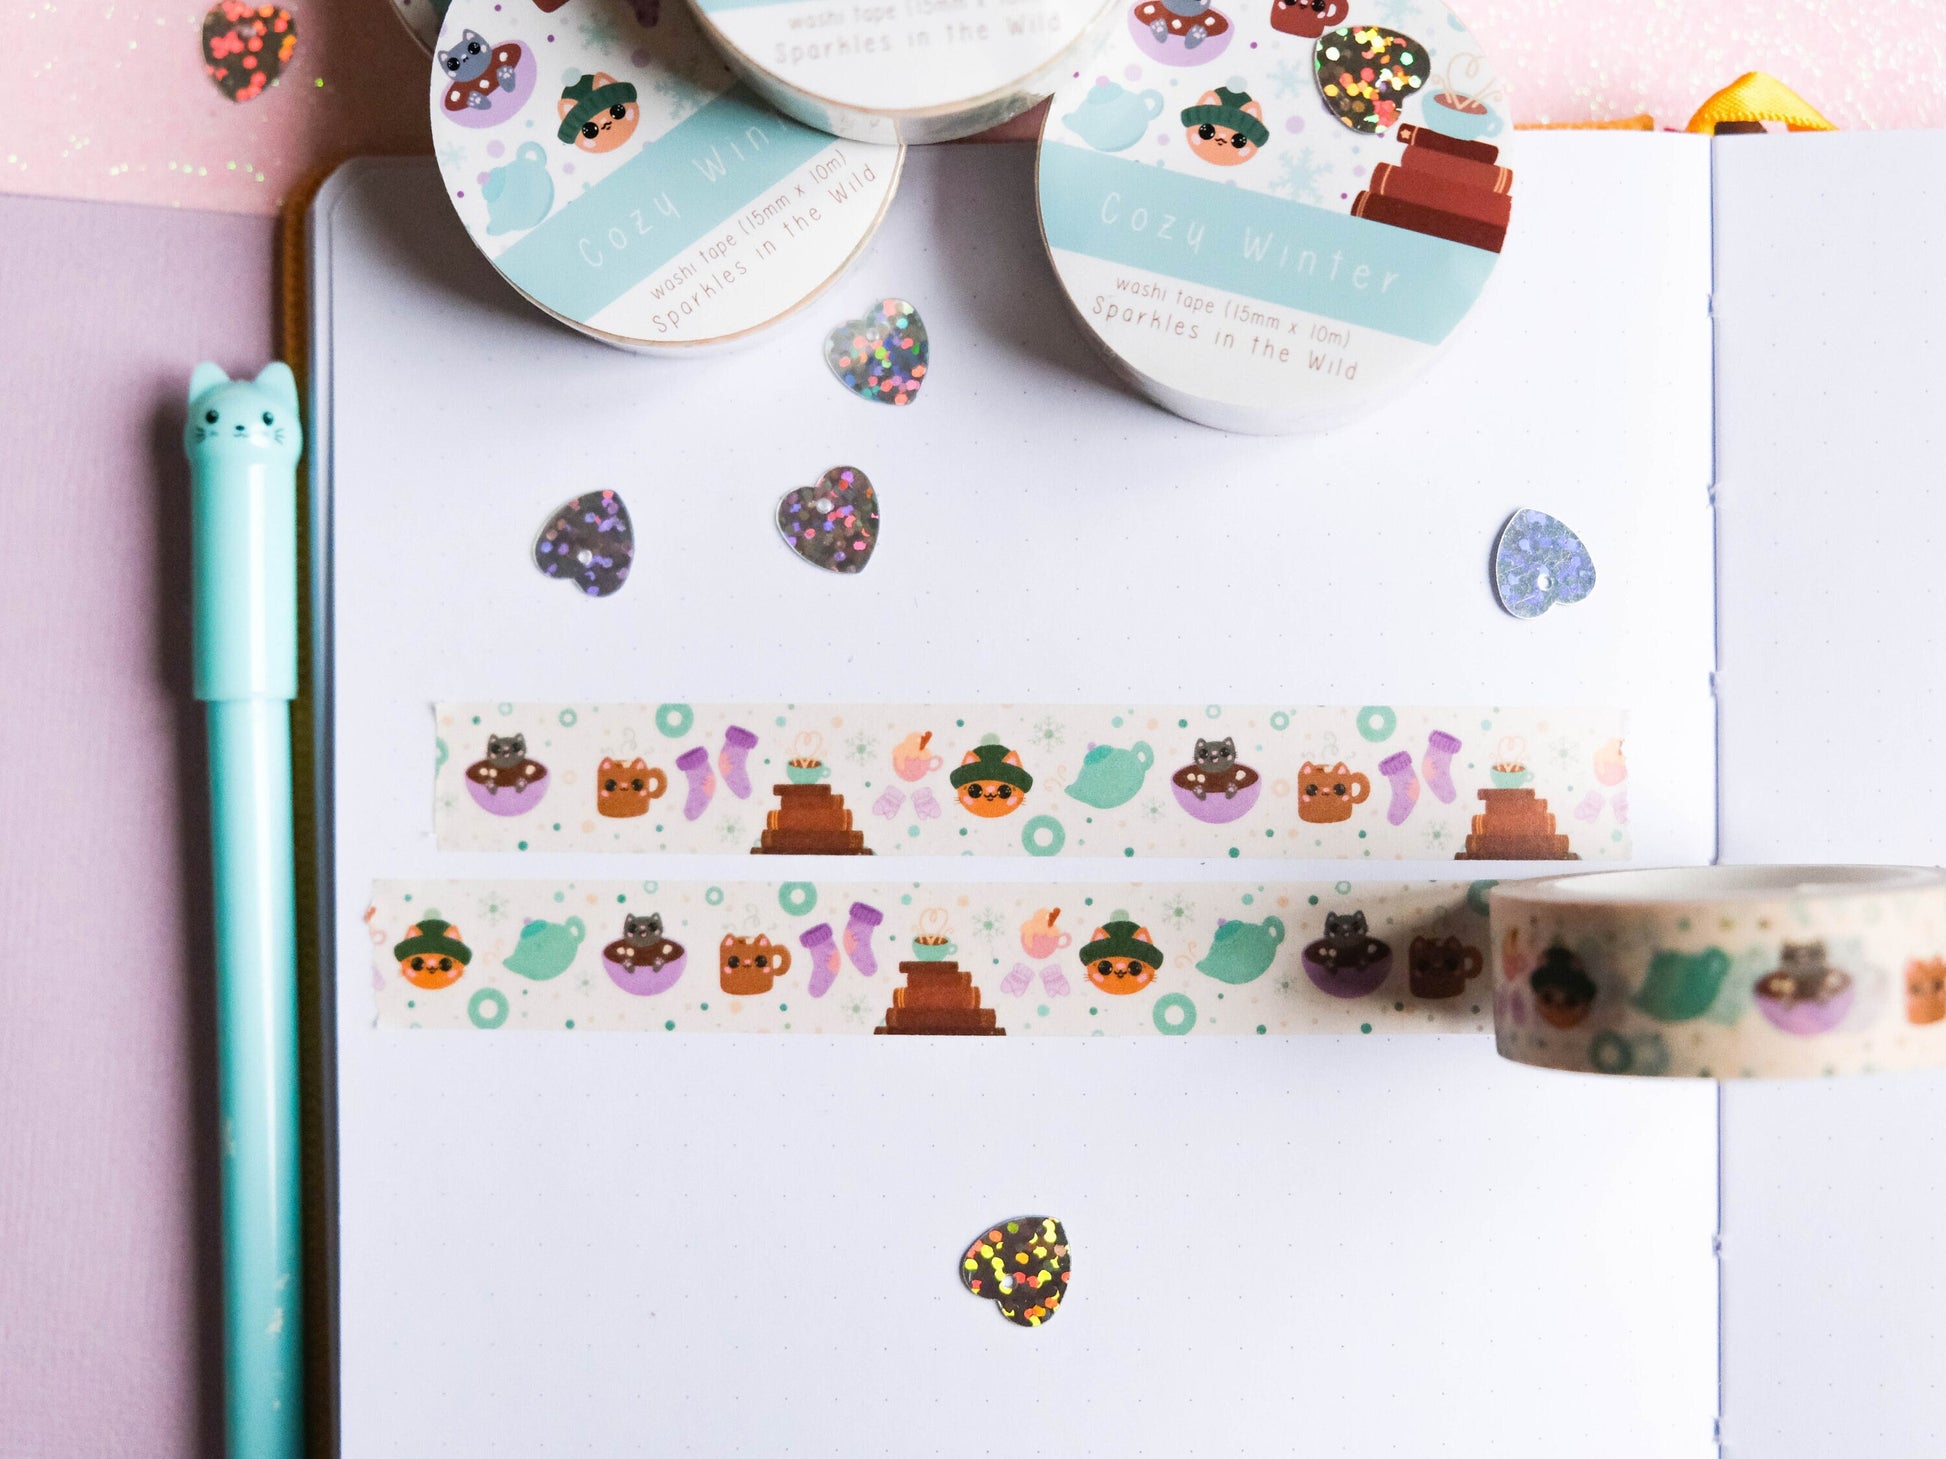 Cozy Winter Washi Tape For Decorating Your Bullet Journal